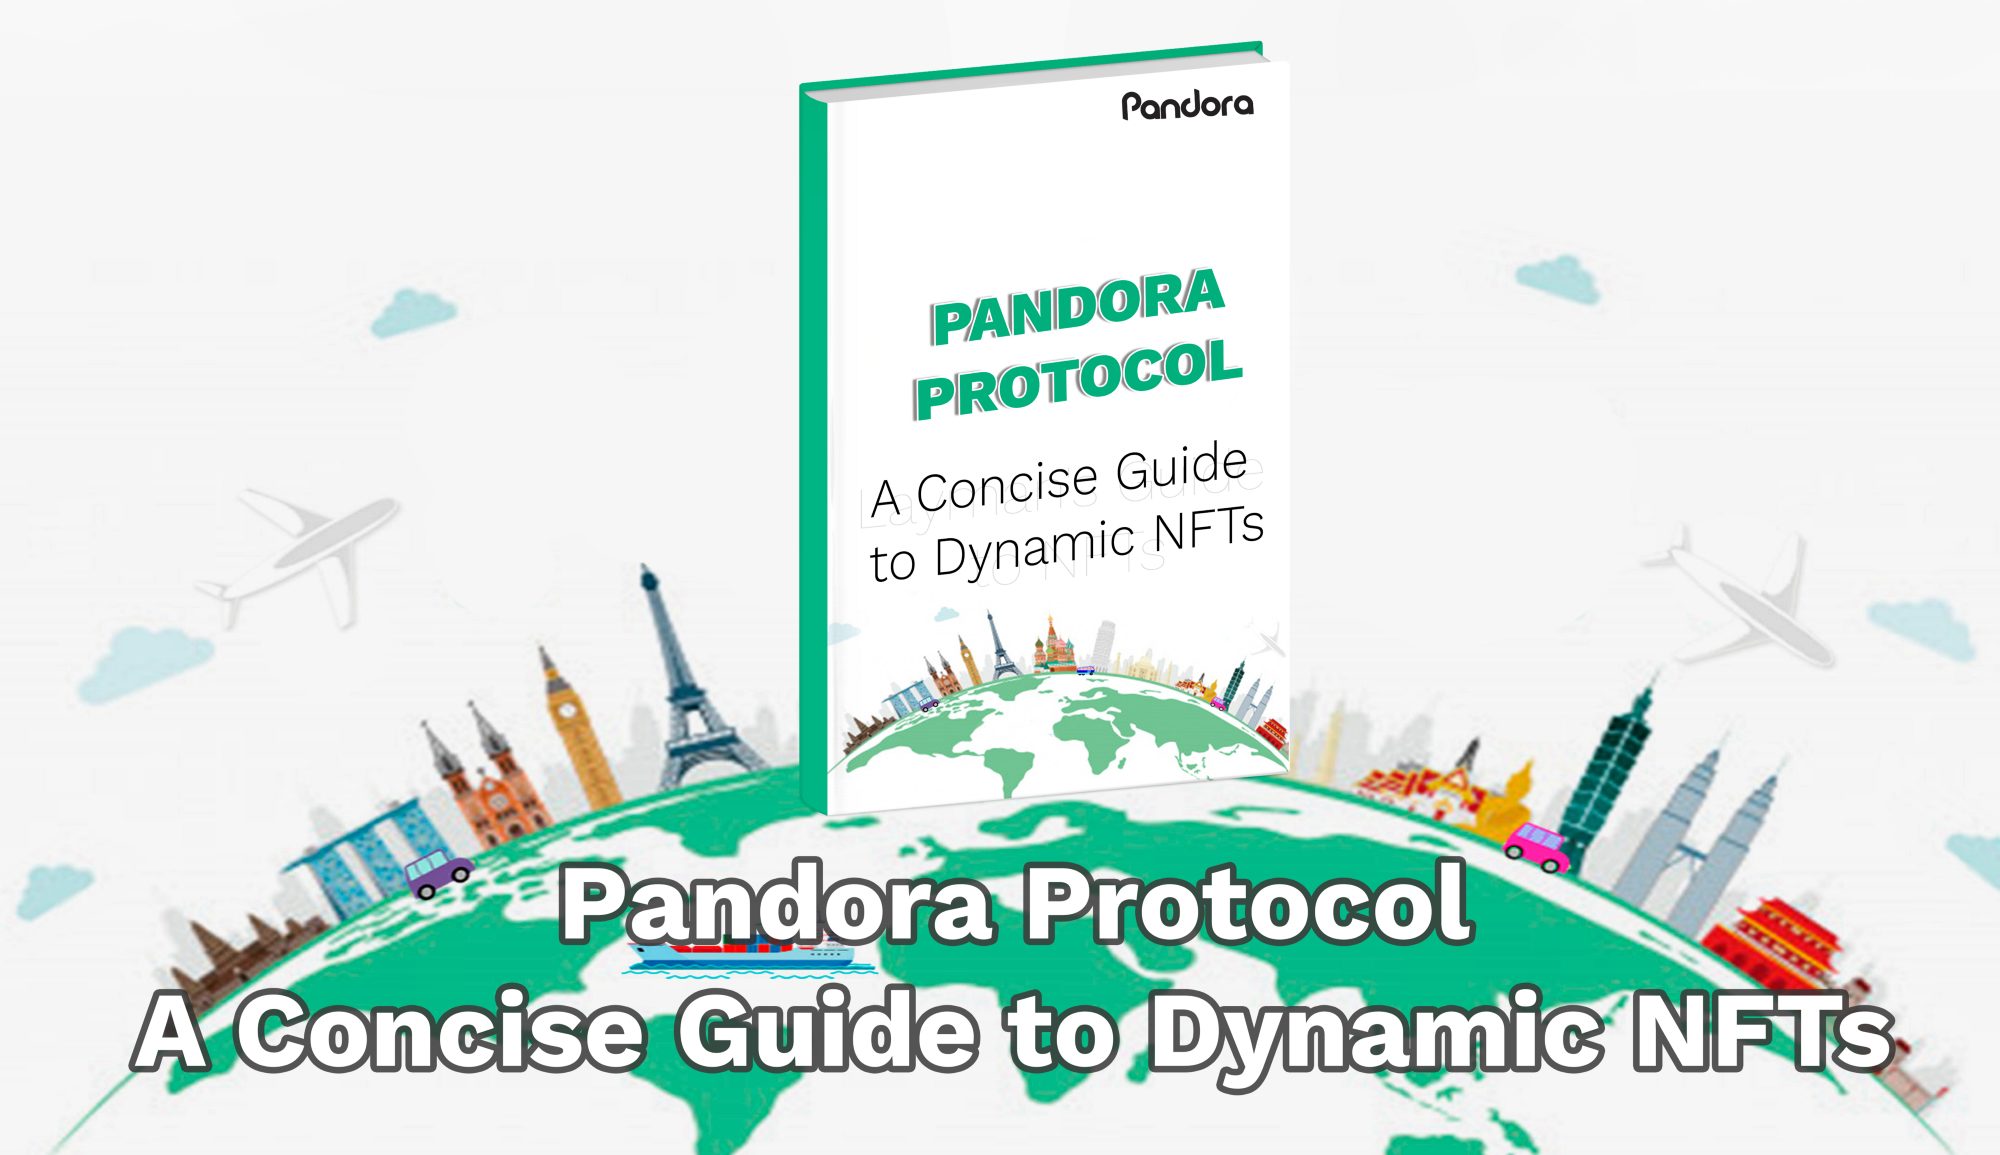 Pandora Protocol: A Concise Guide to Dynamic NFTs